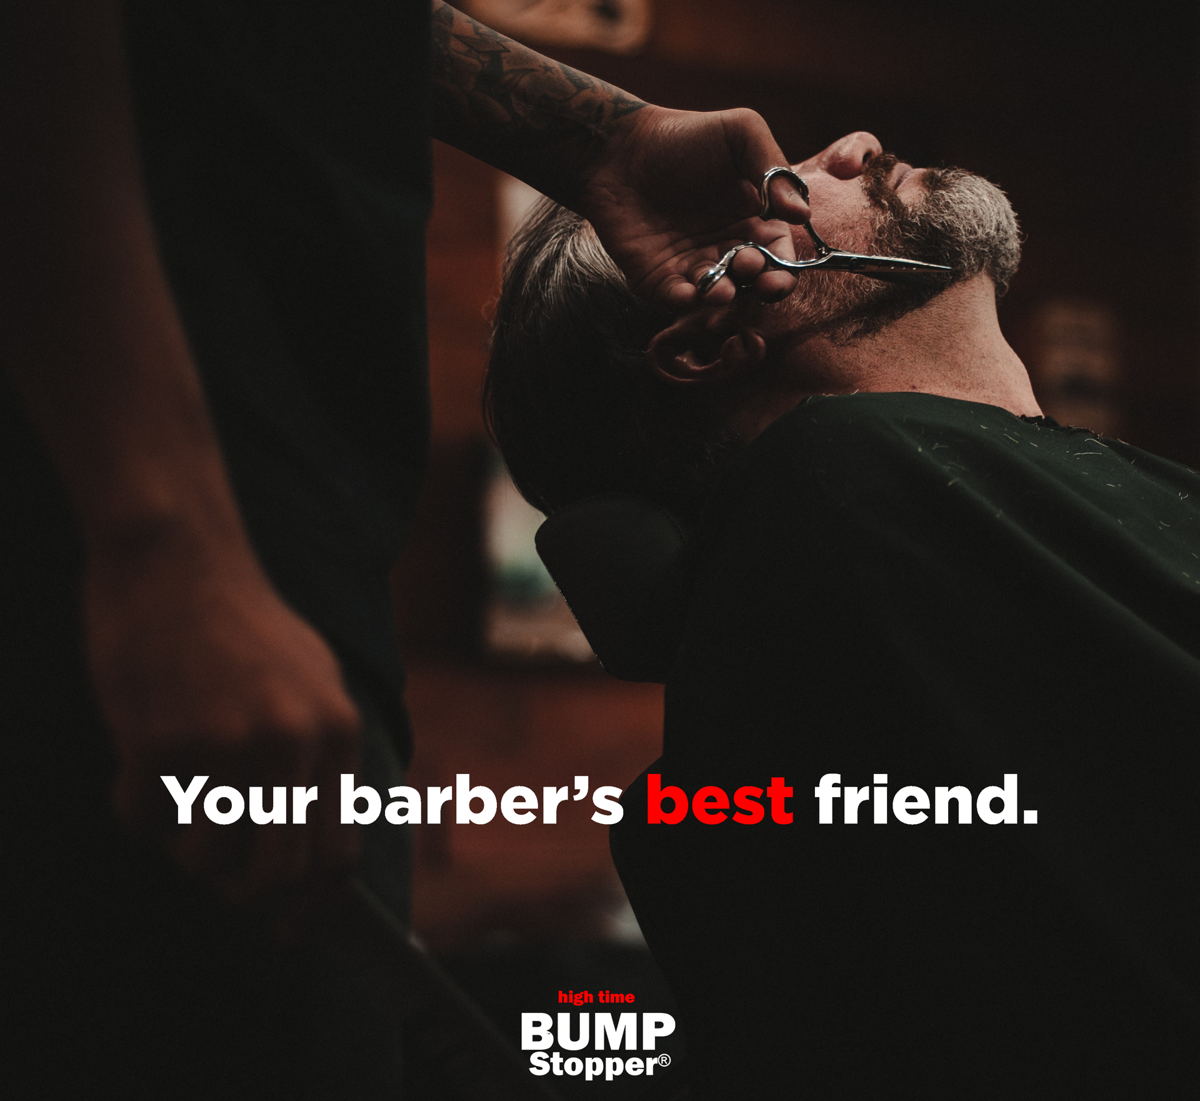 Did you know? #BumpStopper is your #barber's best friend